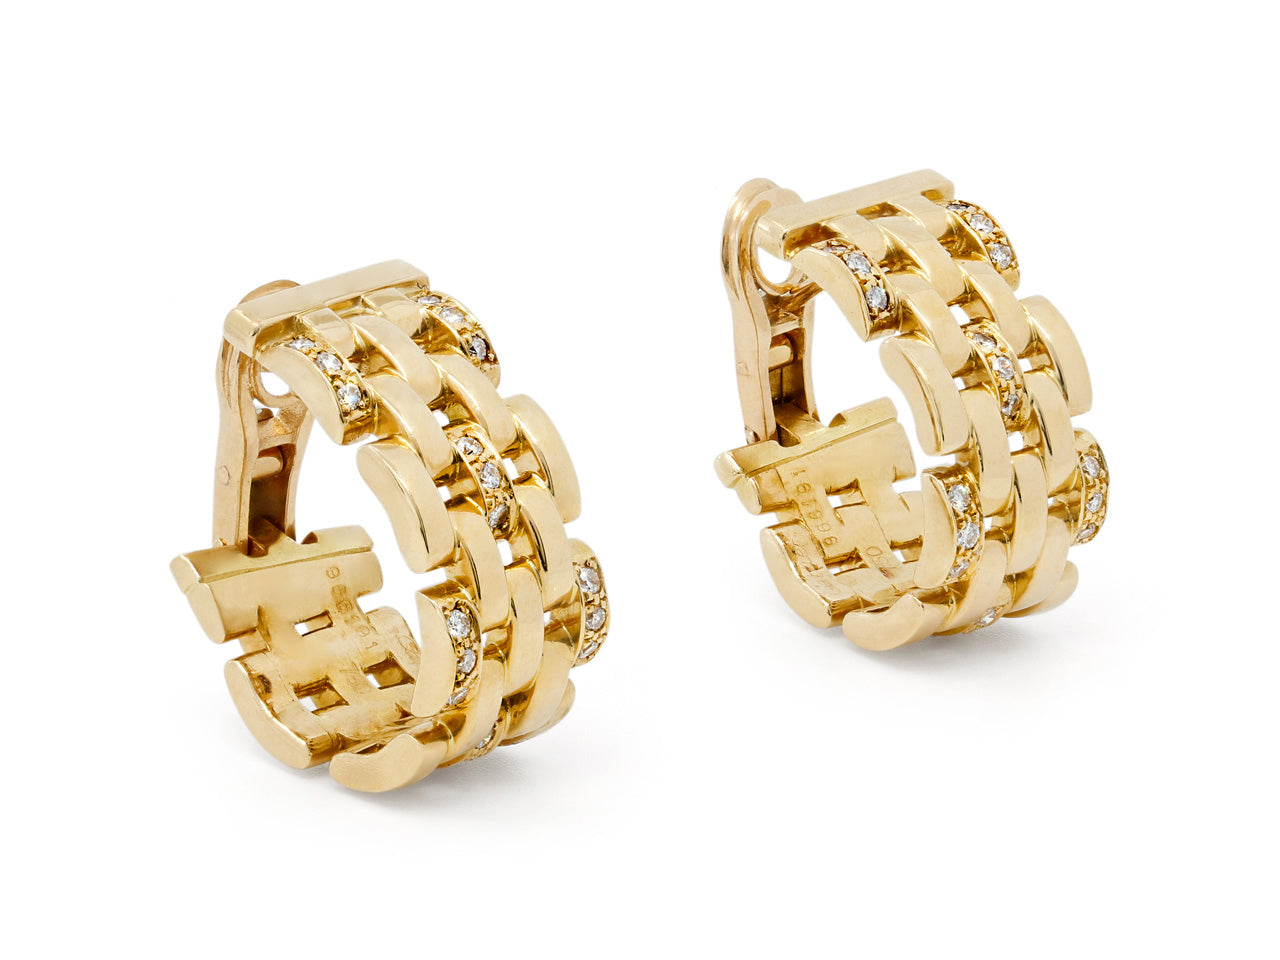 Cartier Panthere Maillon Diamond Earrings in 18K Gold